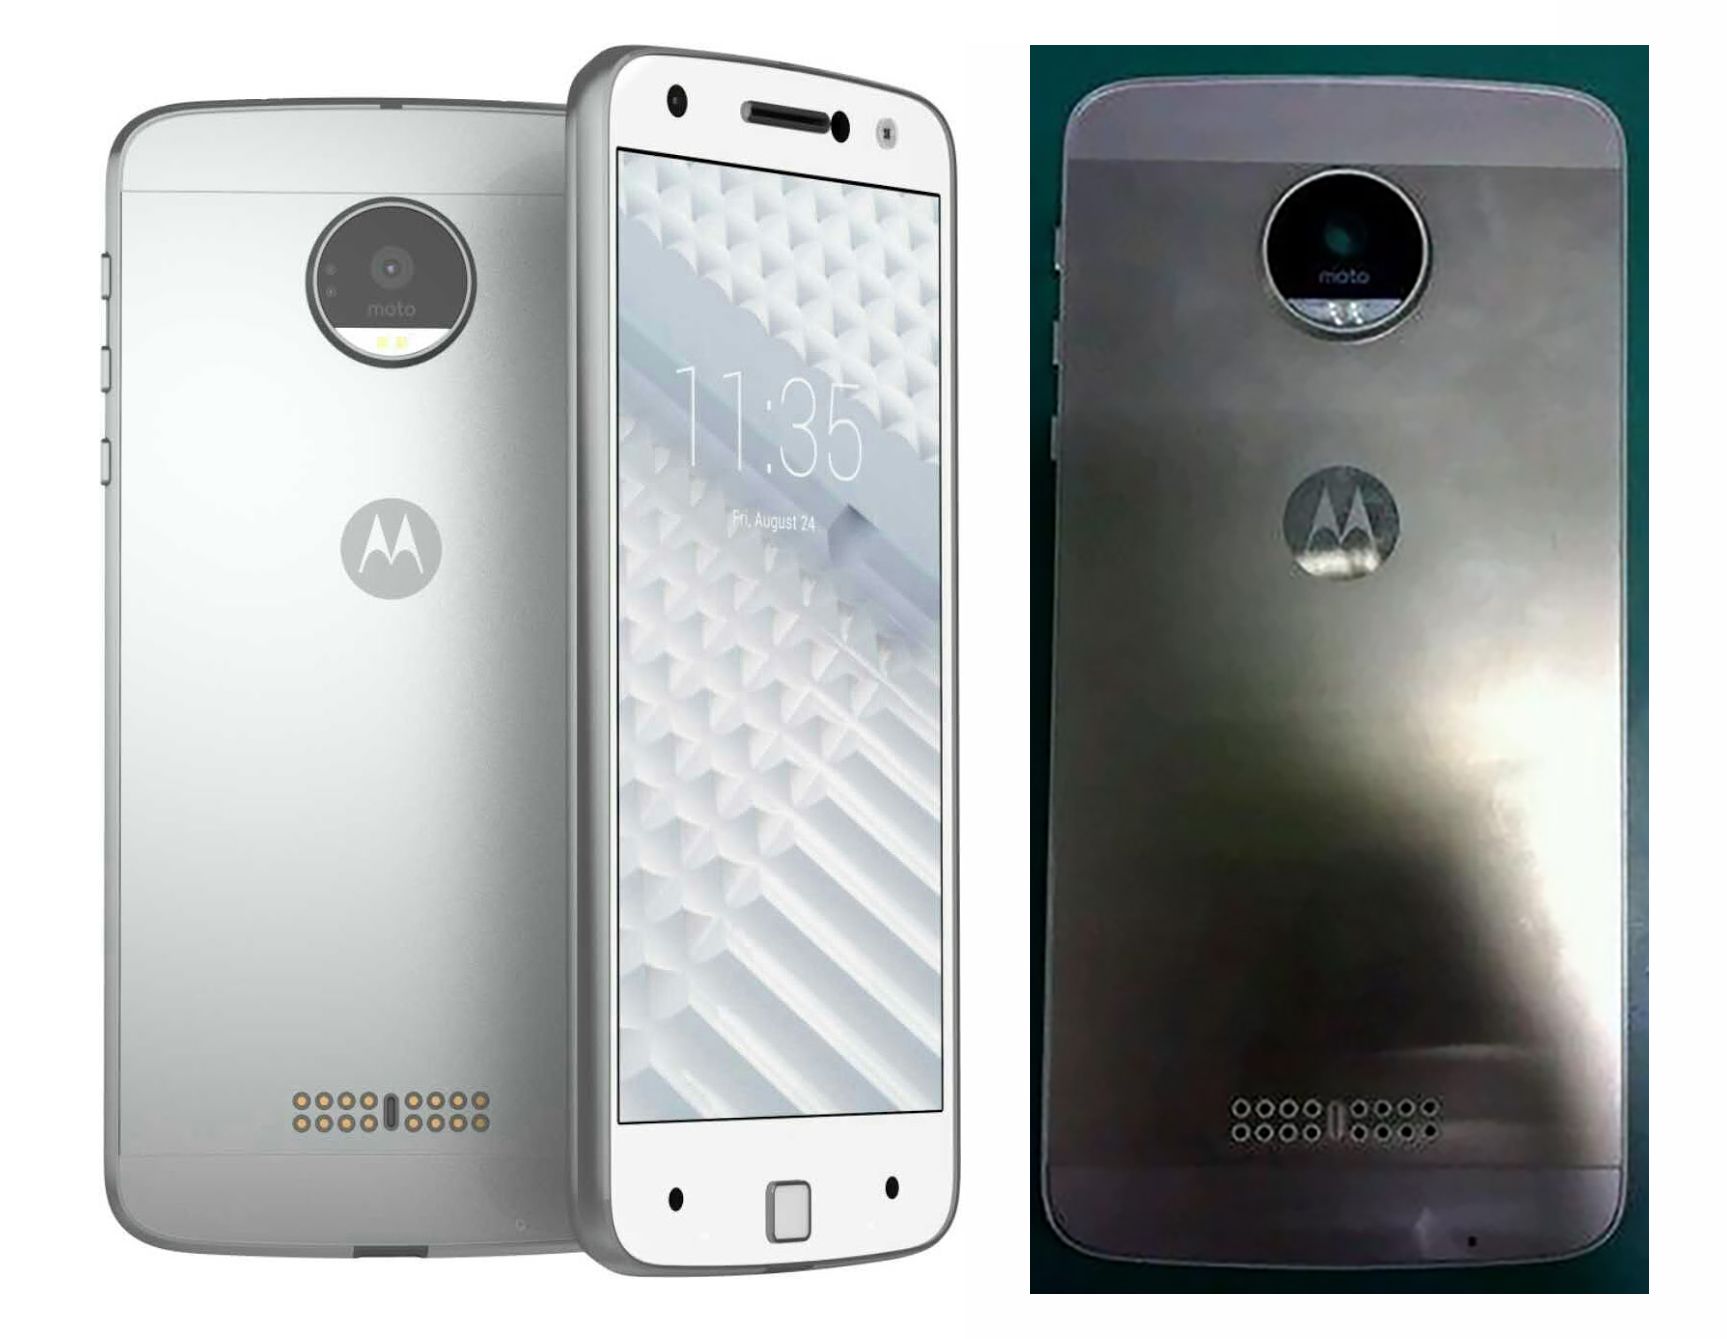 new moto x leaks reveal two phones all metal design modular backplates image 1